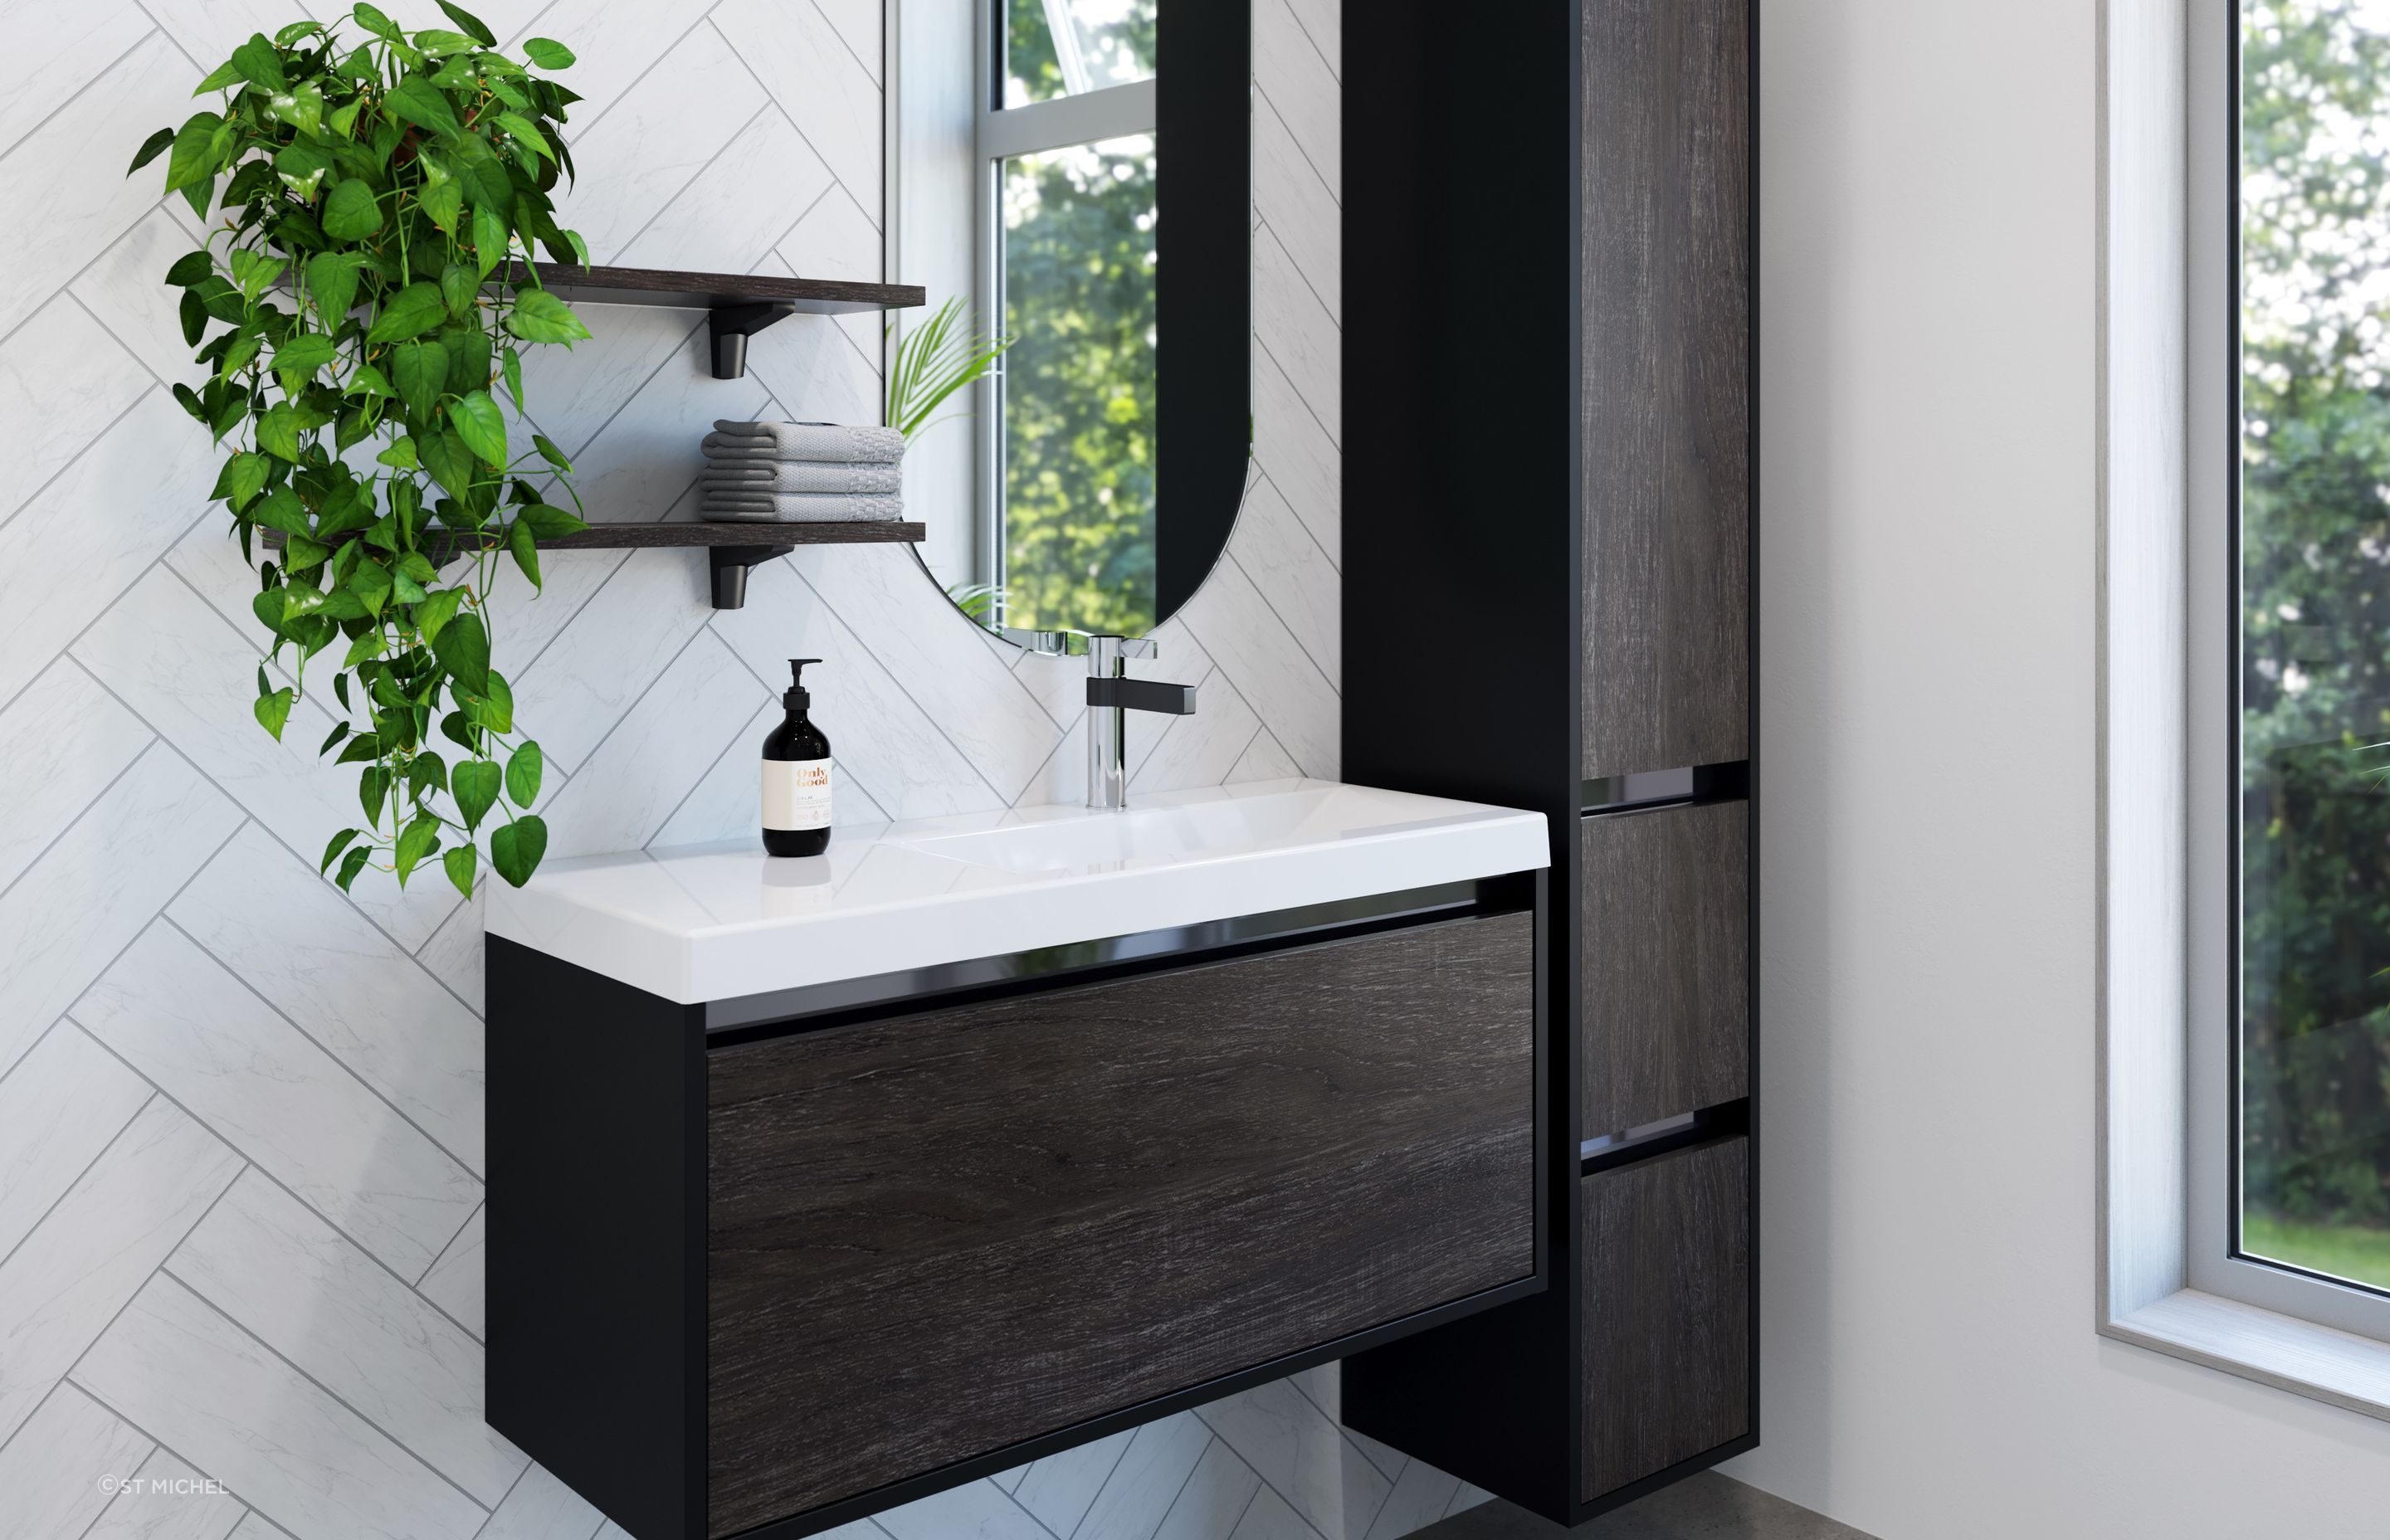 A little greenery goes a long way when paired with a superior vanity like the City 35 Vanity.